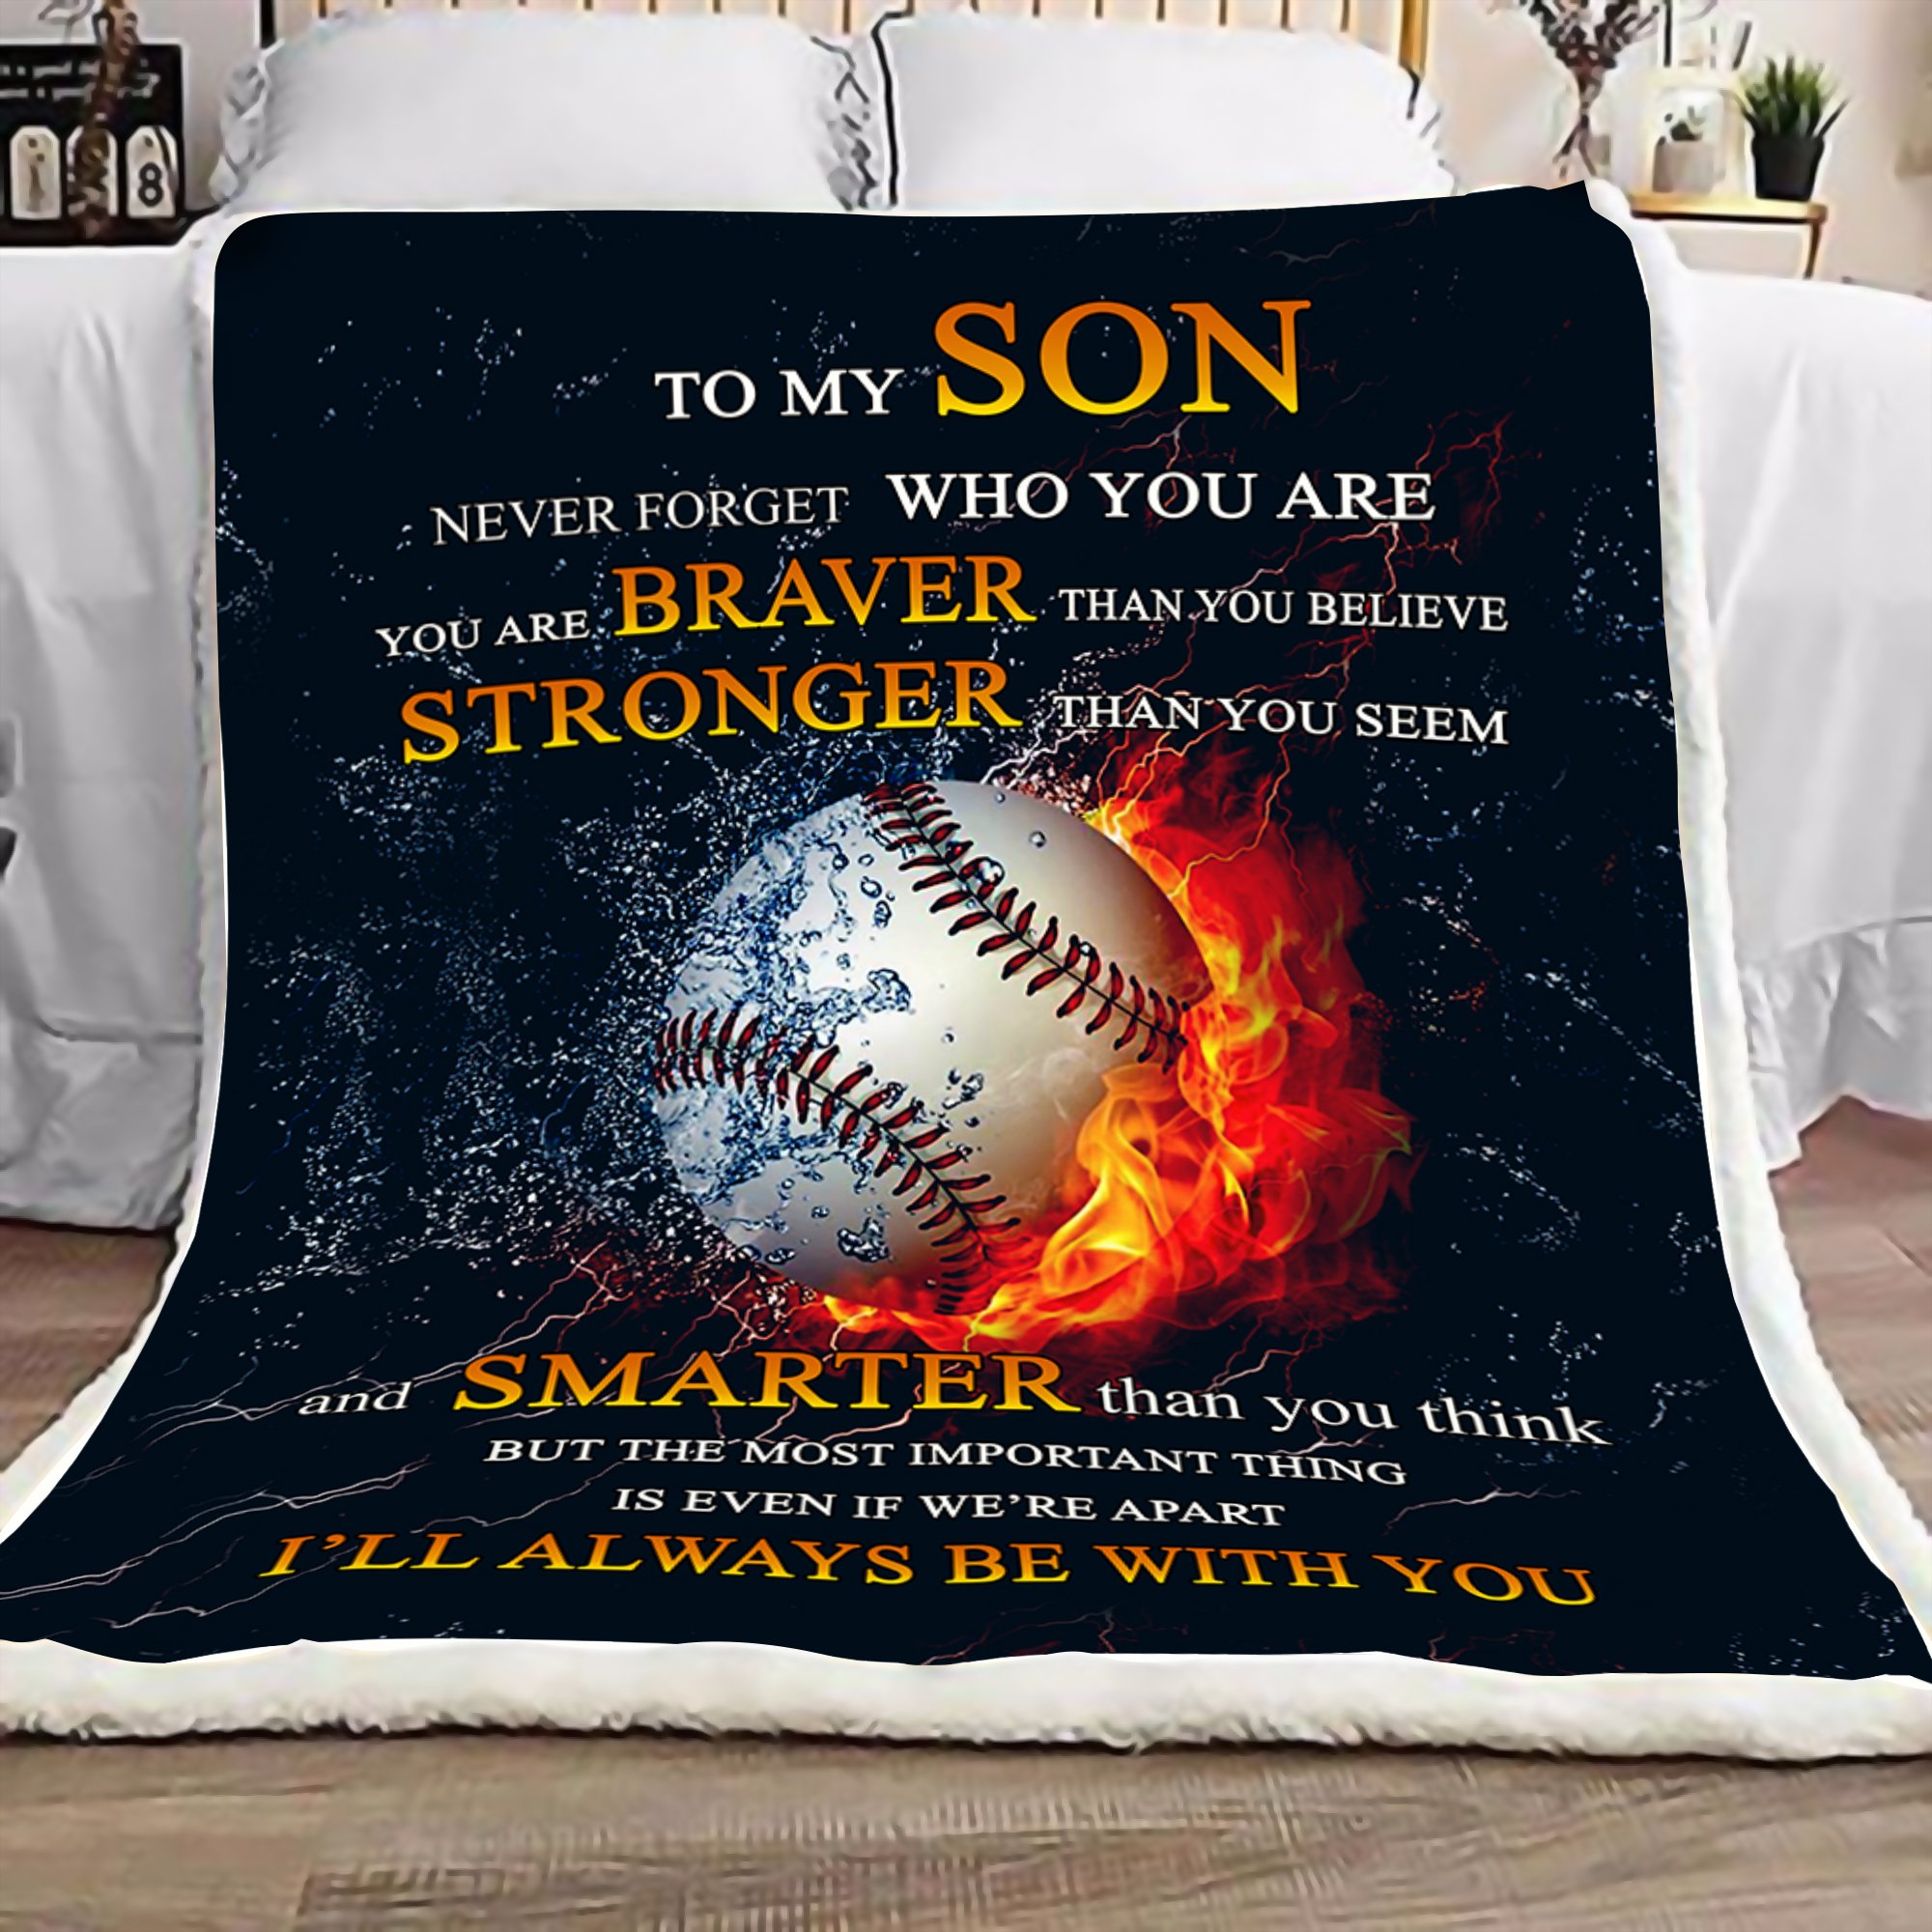 To my son never forget who you are baseball blanket 3